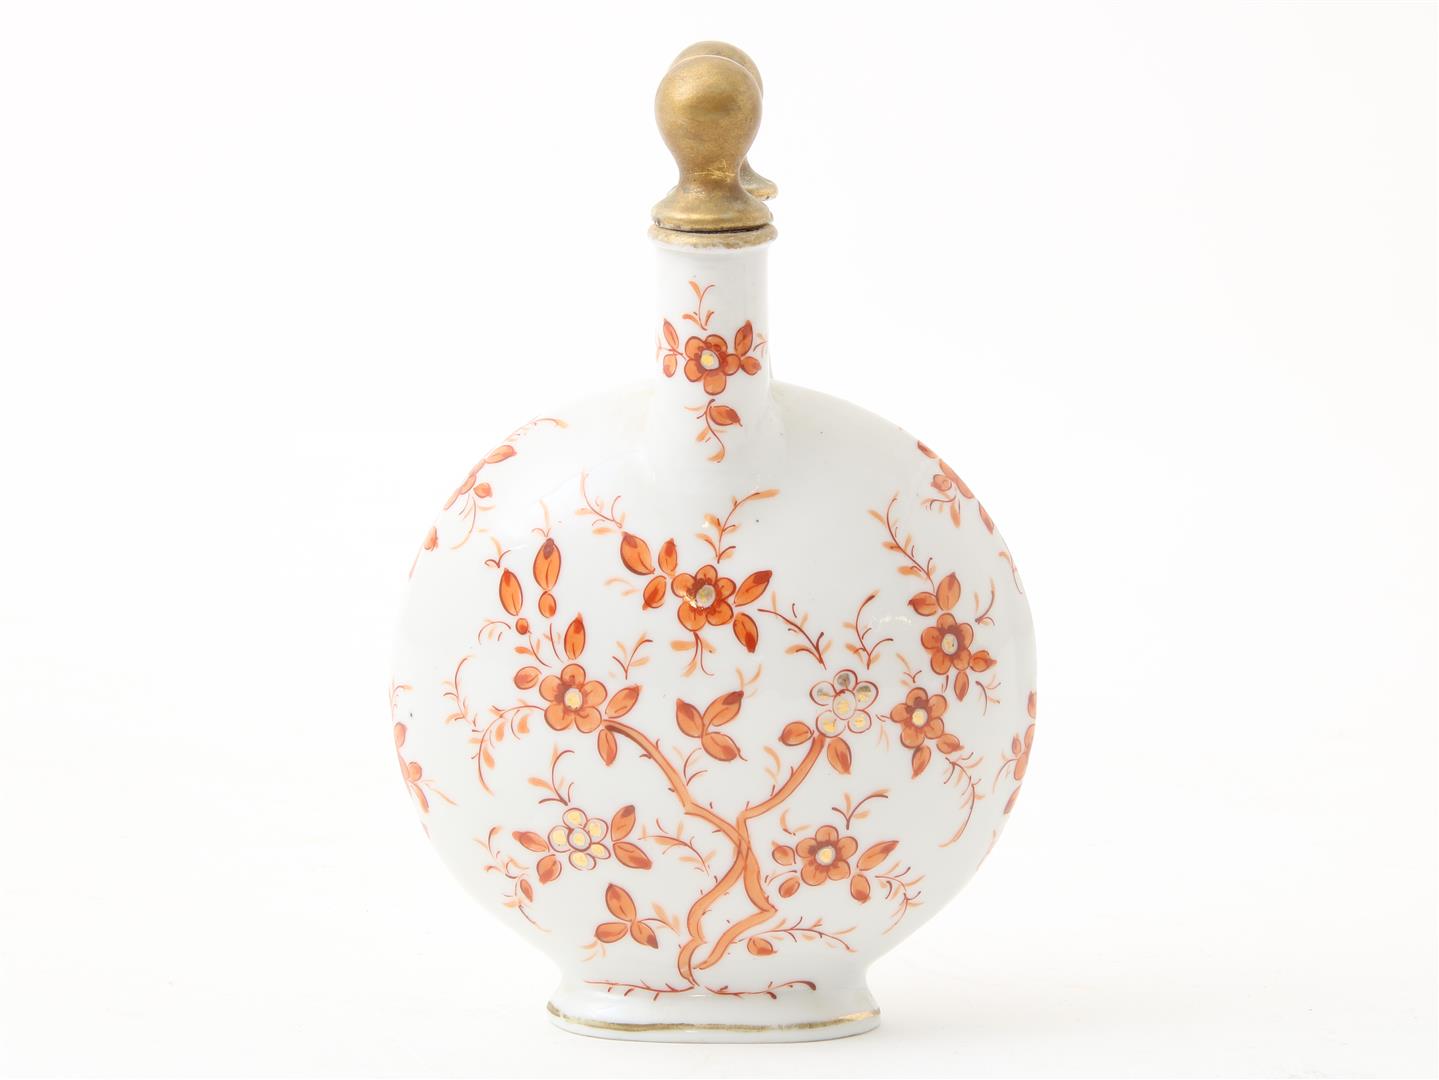 Porcelain bottle with double neck and containers for oil and vinegar, painted with red and gold